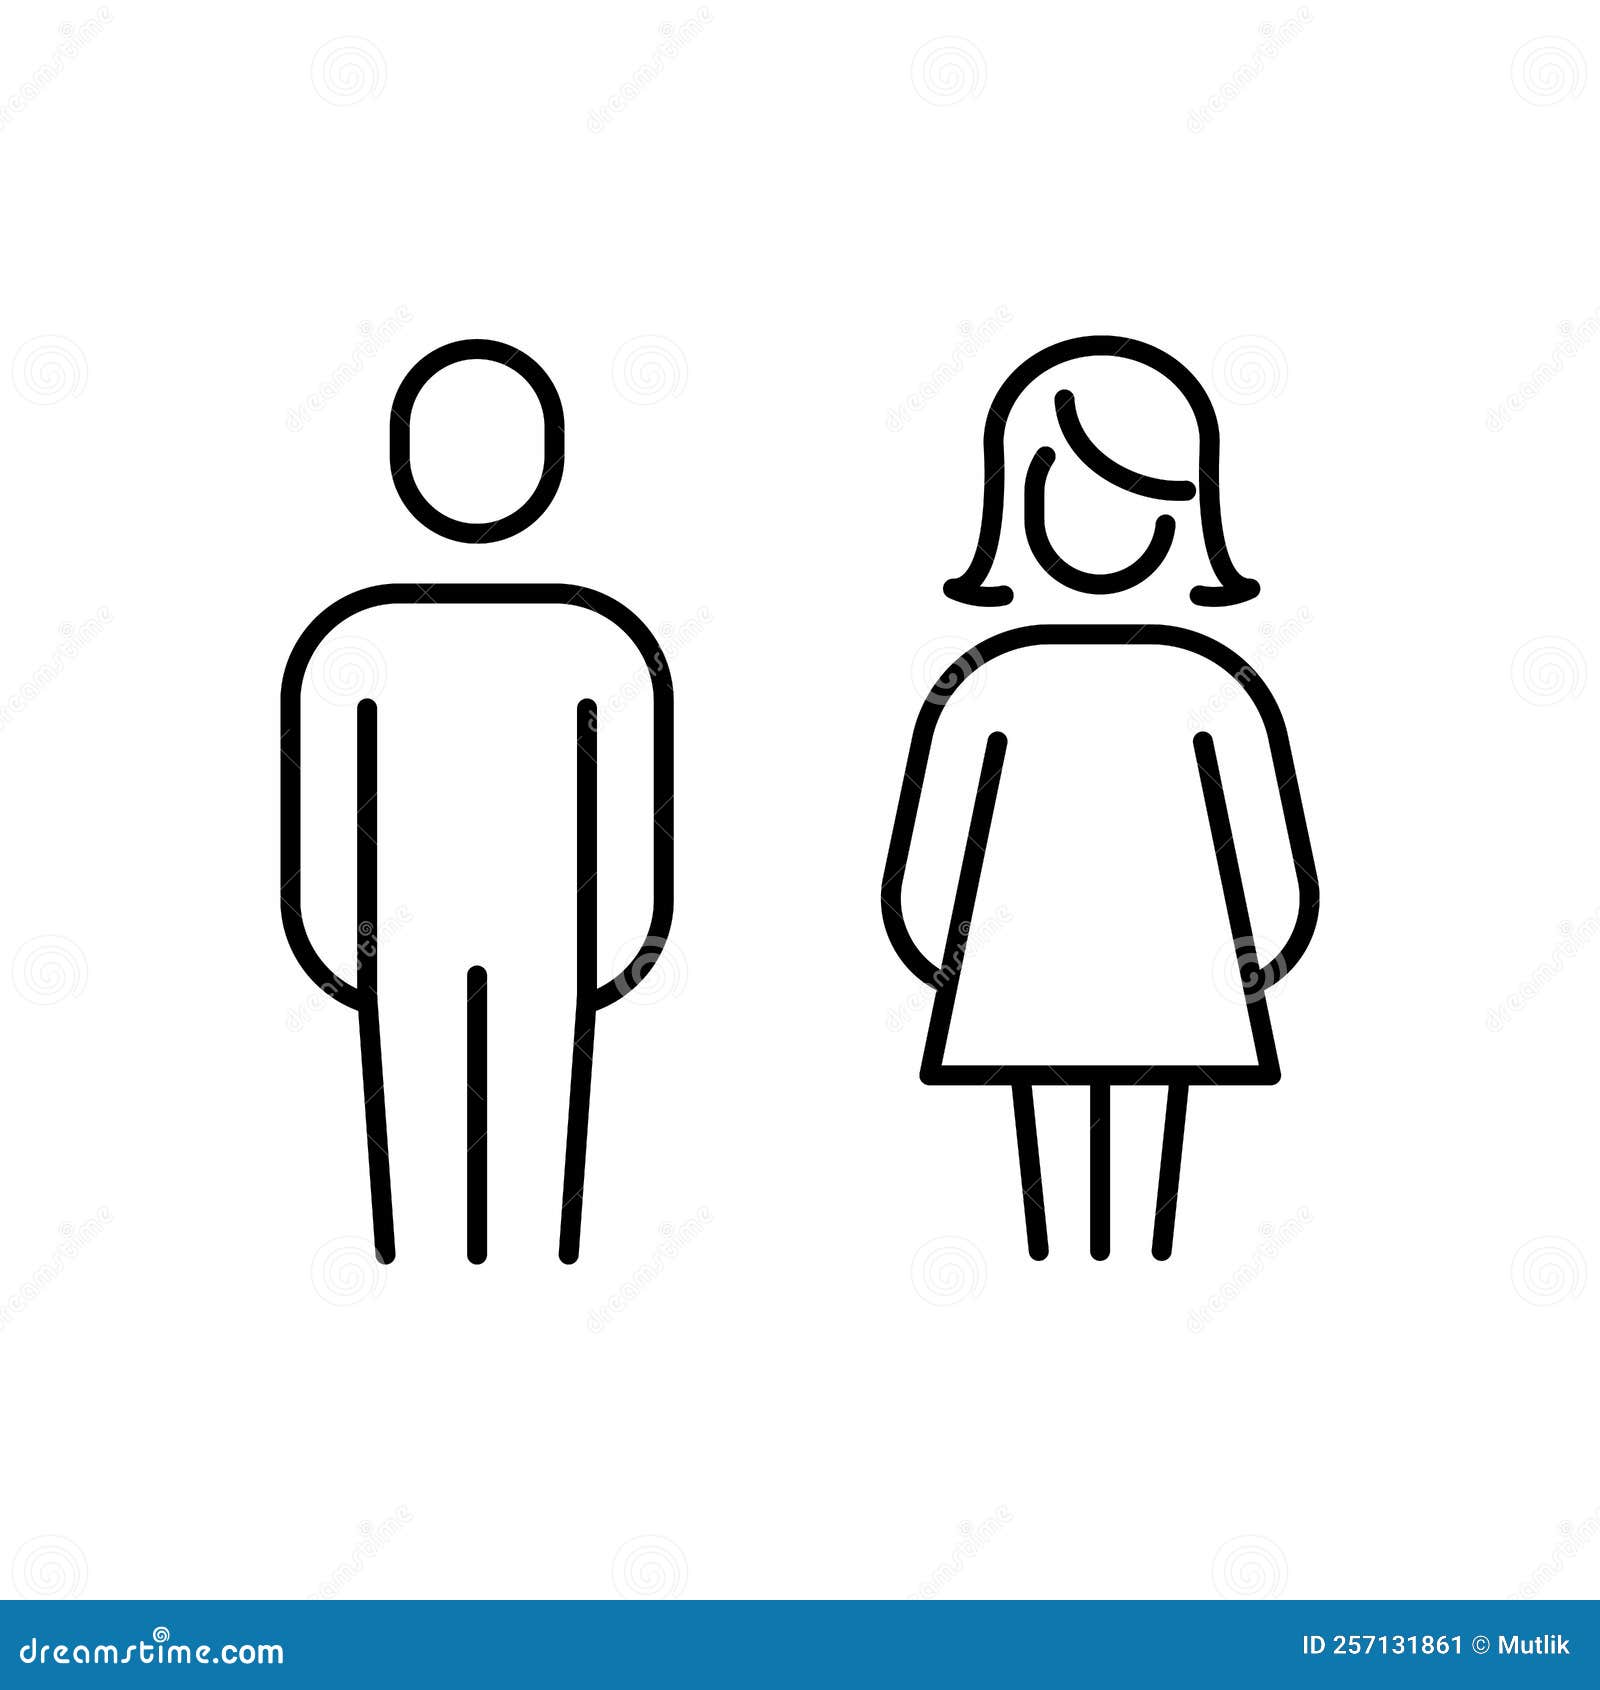 2,036,638 Woman Silhouette Images, Stock Photos, 3D objects, & Vectors